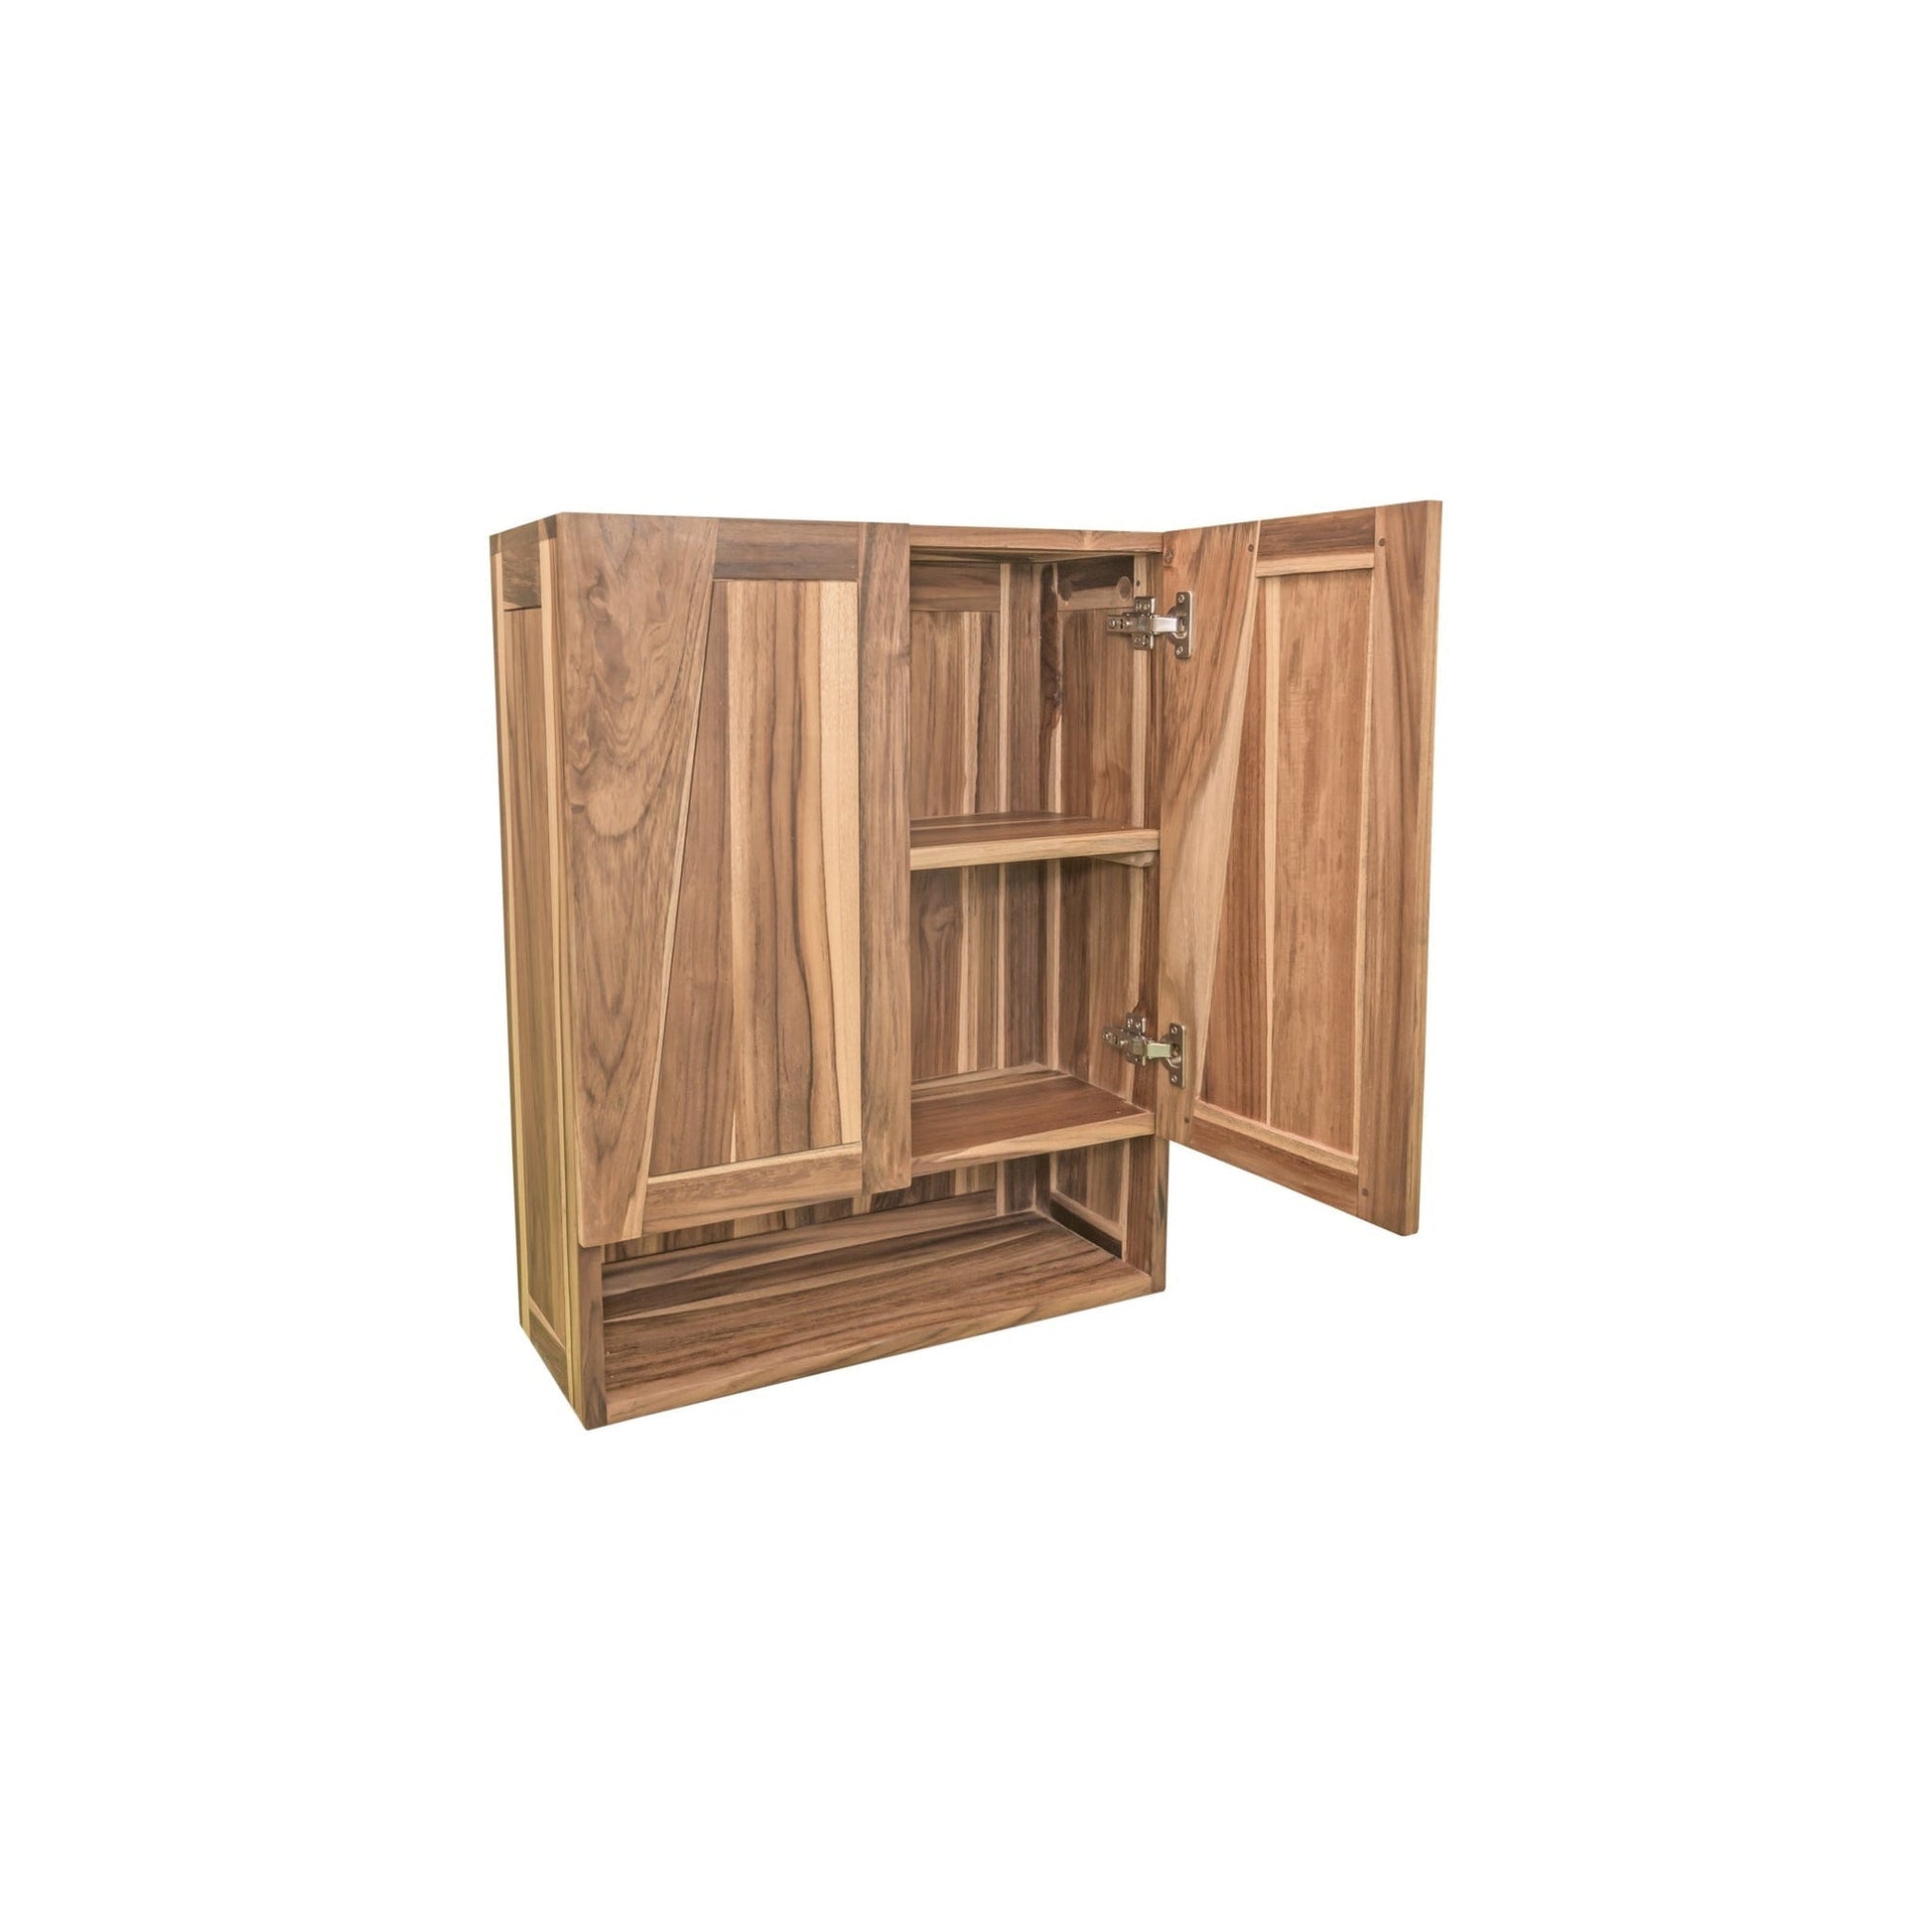 EcoDecors Significado 24" EarthyTeak Solid Teak Wood Fully Assembled Wall Cabinet